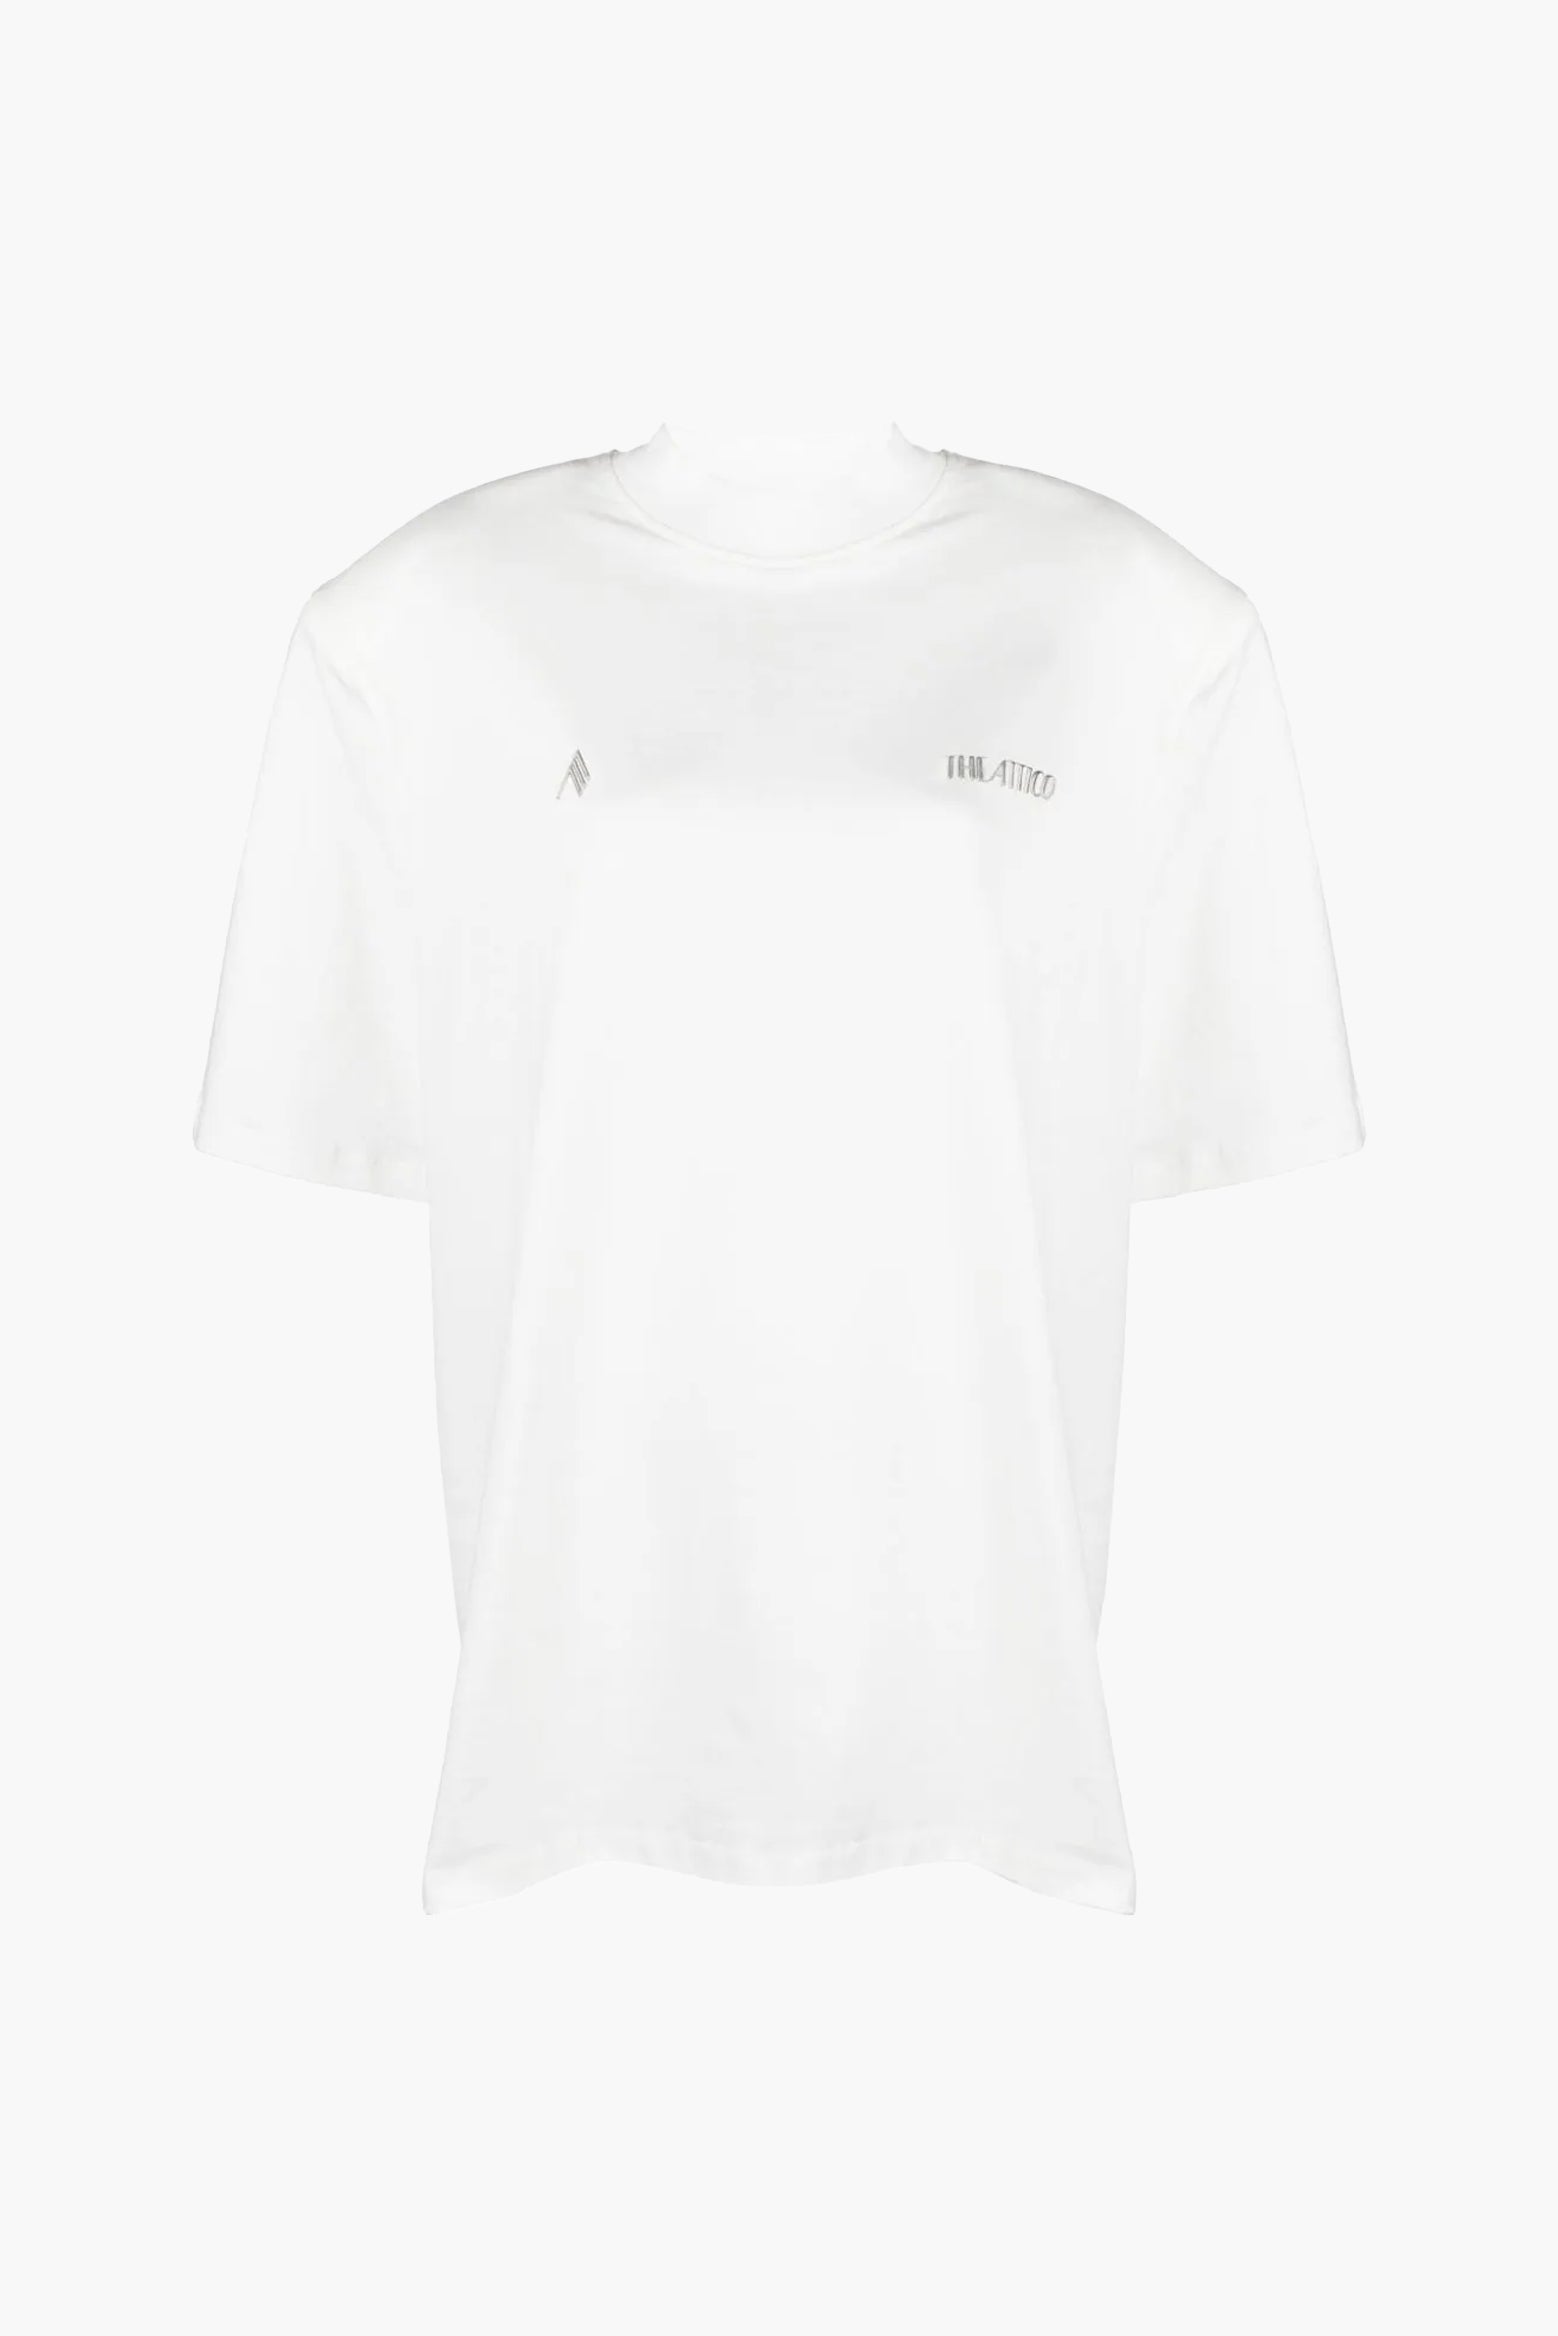 The Attico Kilie T-Shirt in White available at The New Trend Australia.